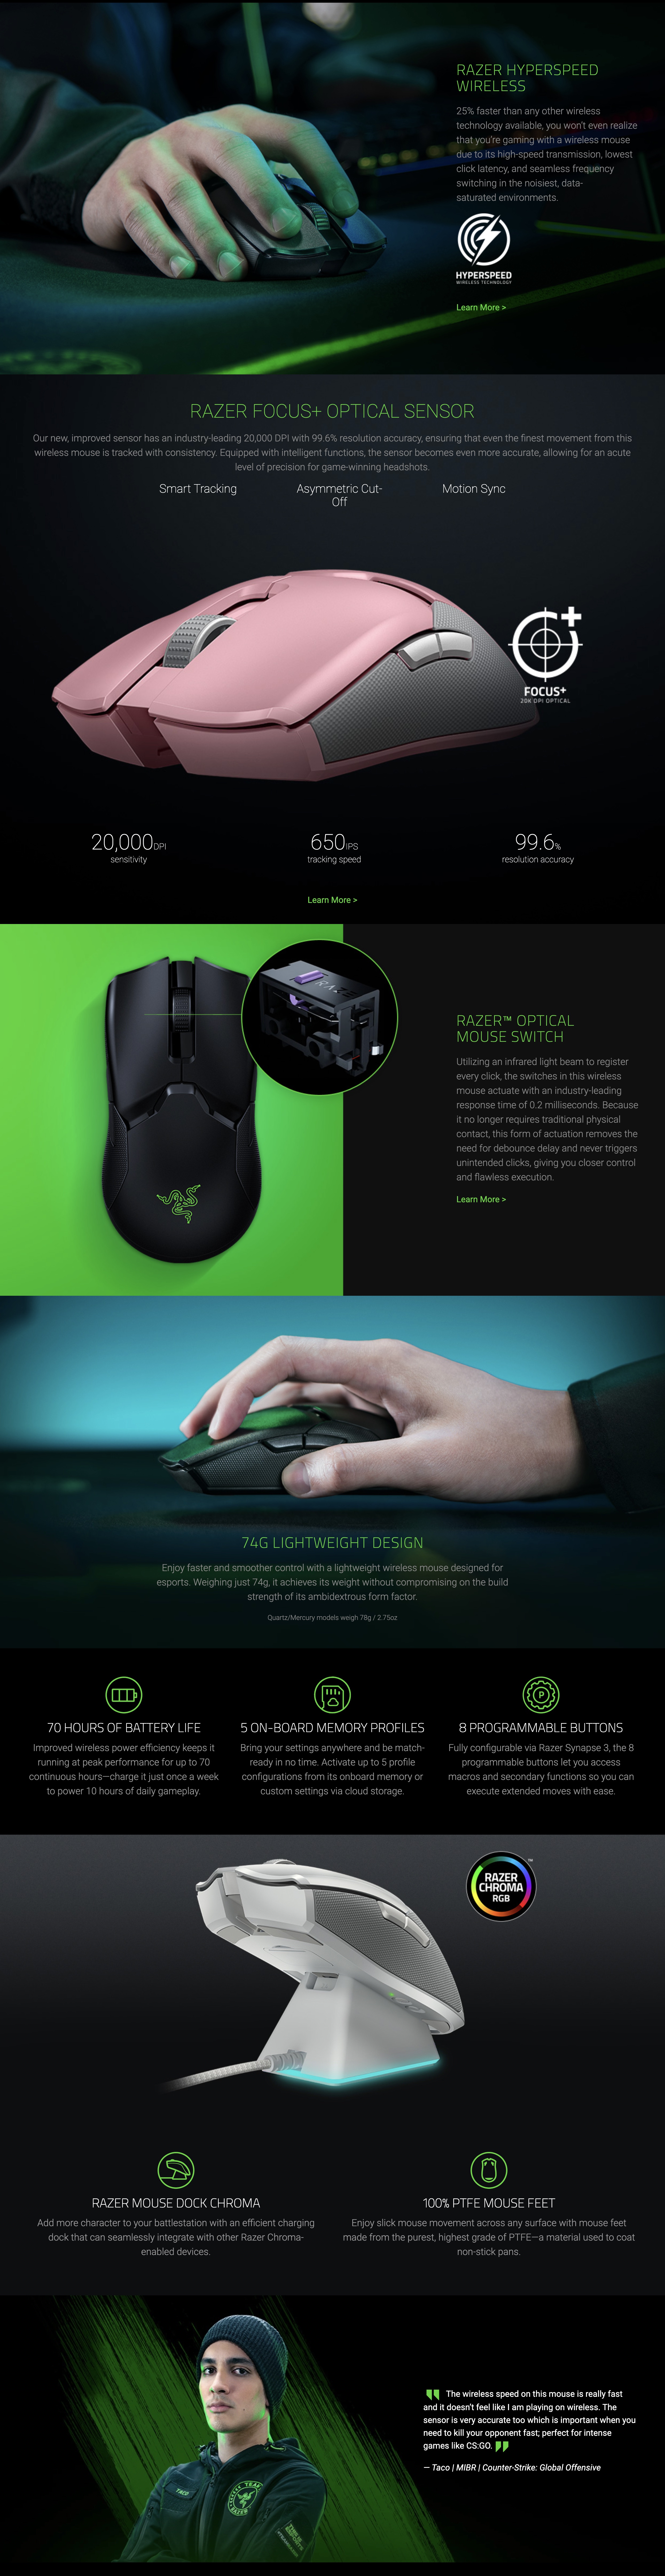 Razer-Viper-Ultimate-With-Charging-Dock-HyperSpeed-Wireless-With-Ambidextrous-Gaming-Mouse-Description-2